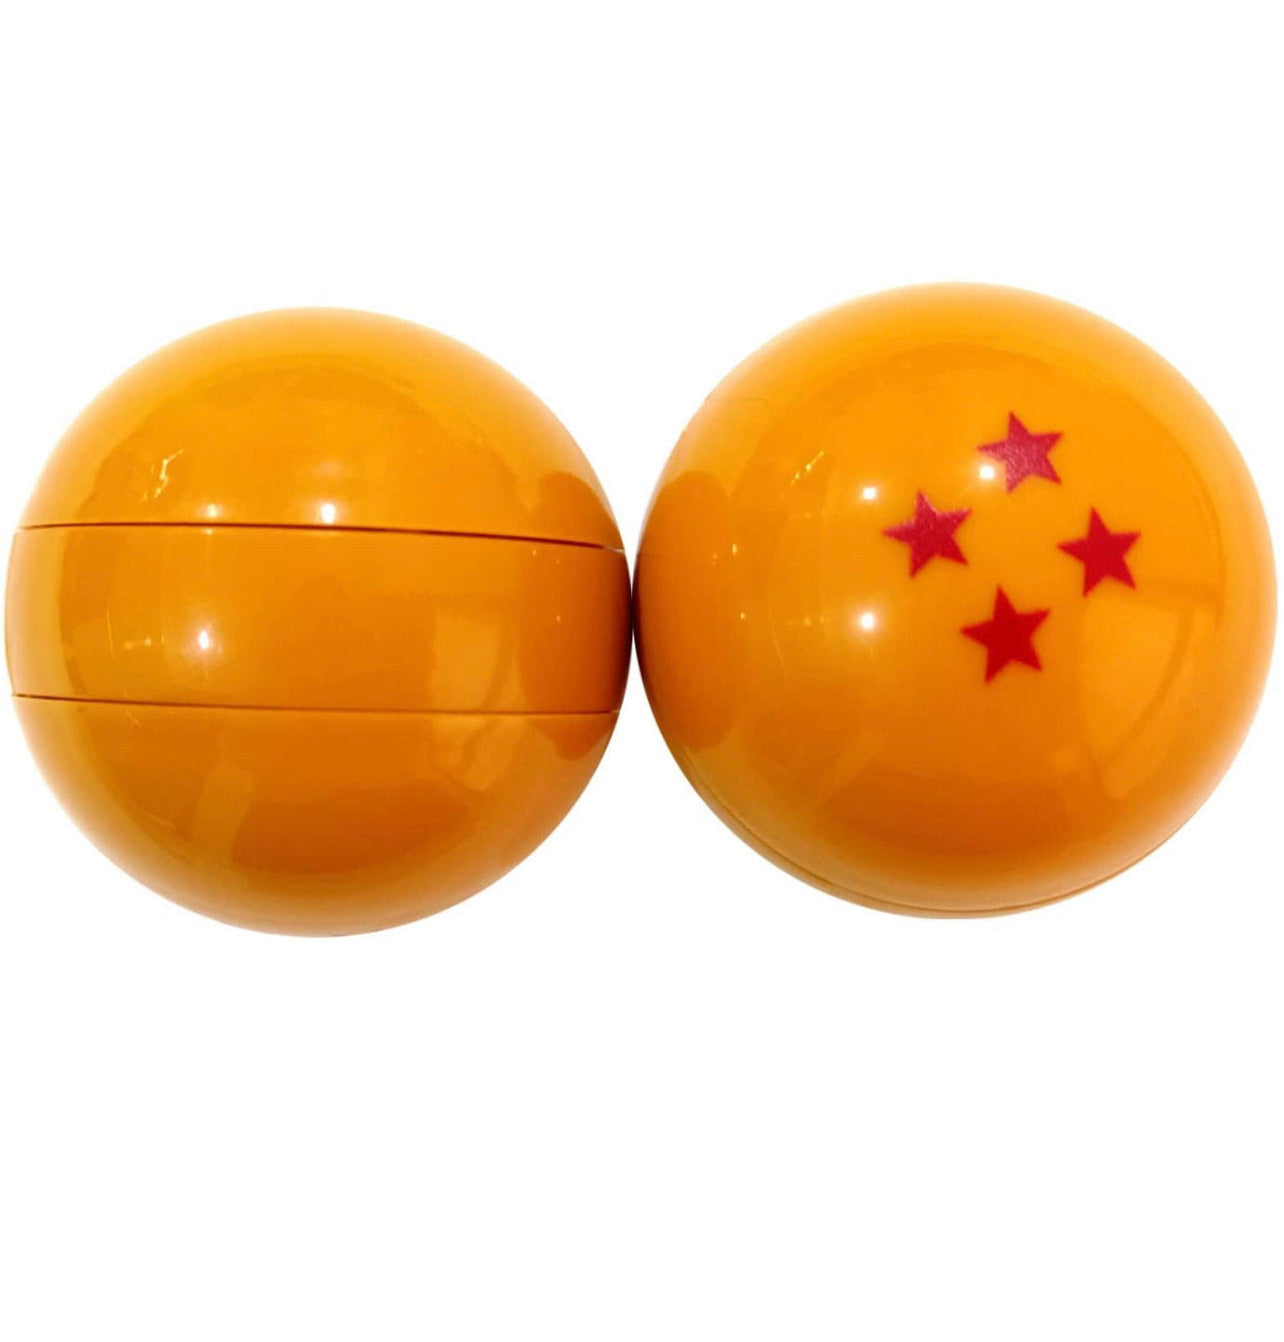 DBZ ball All Stars Herbal and spice Grinder kitchenware Gift Anime fan collectable